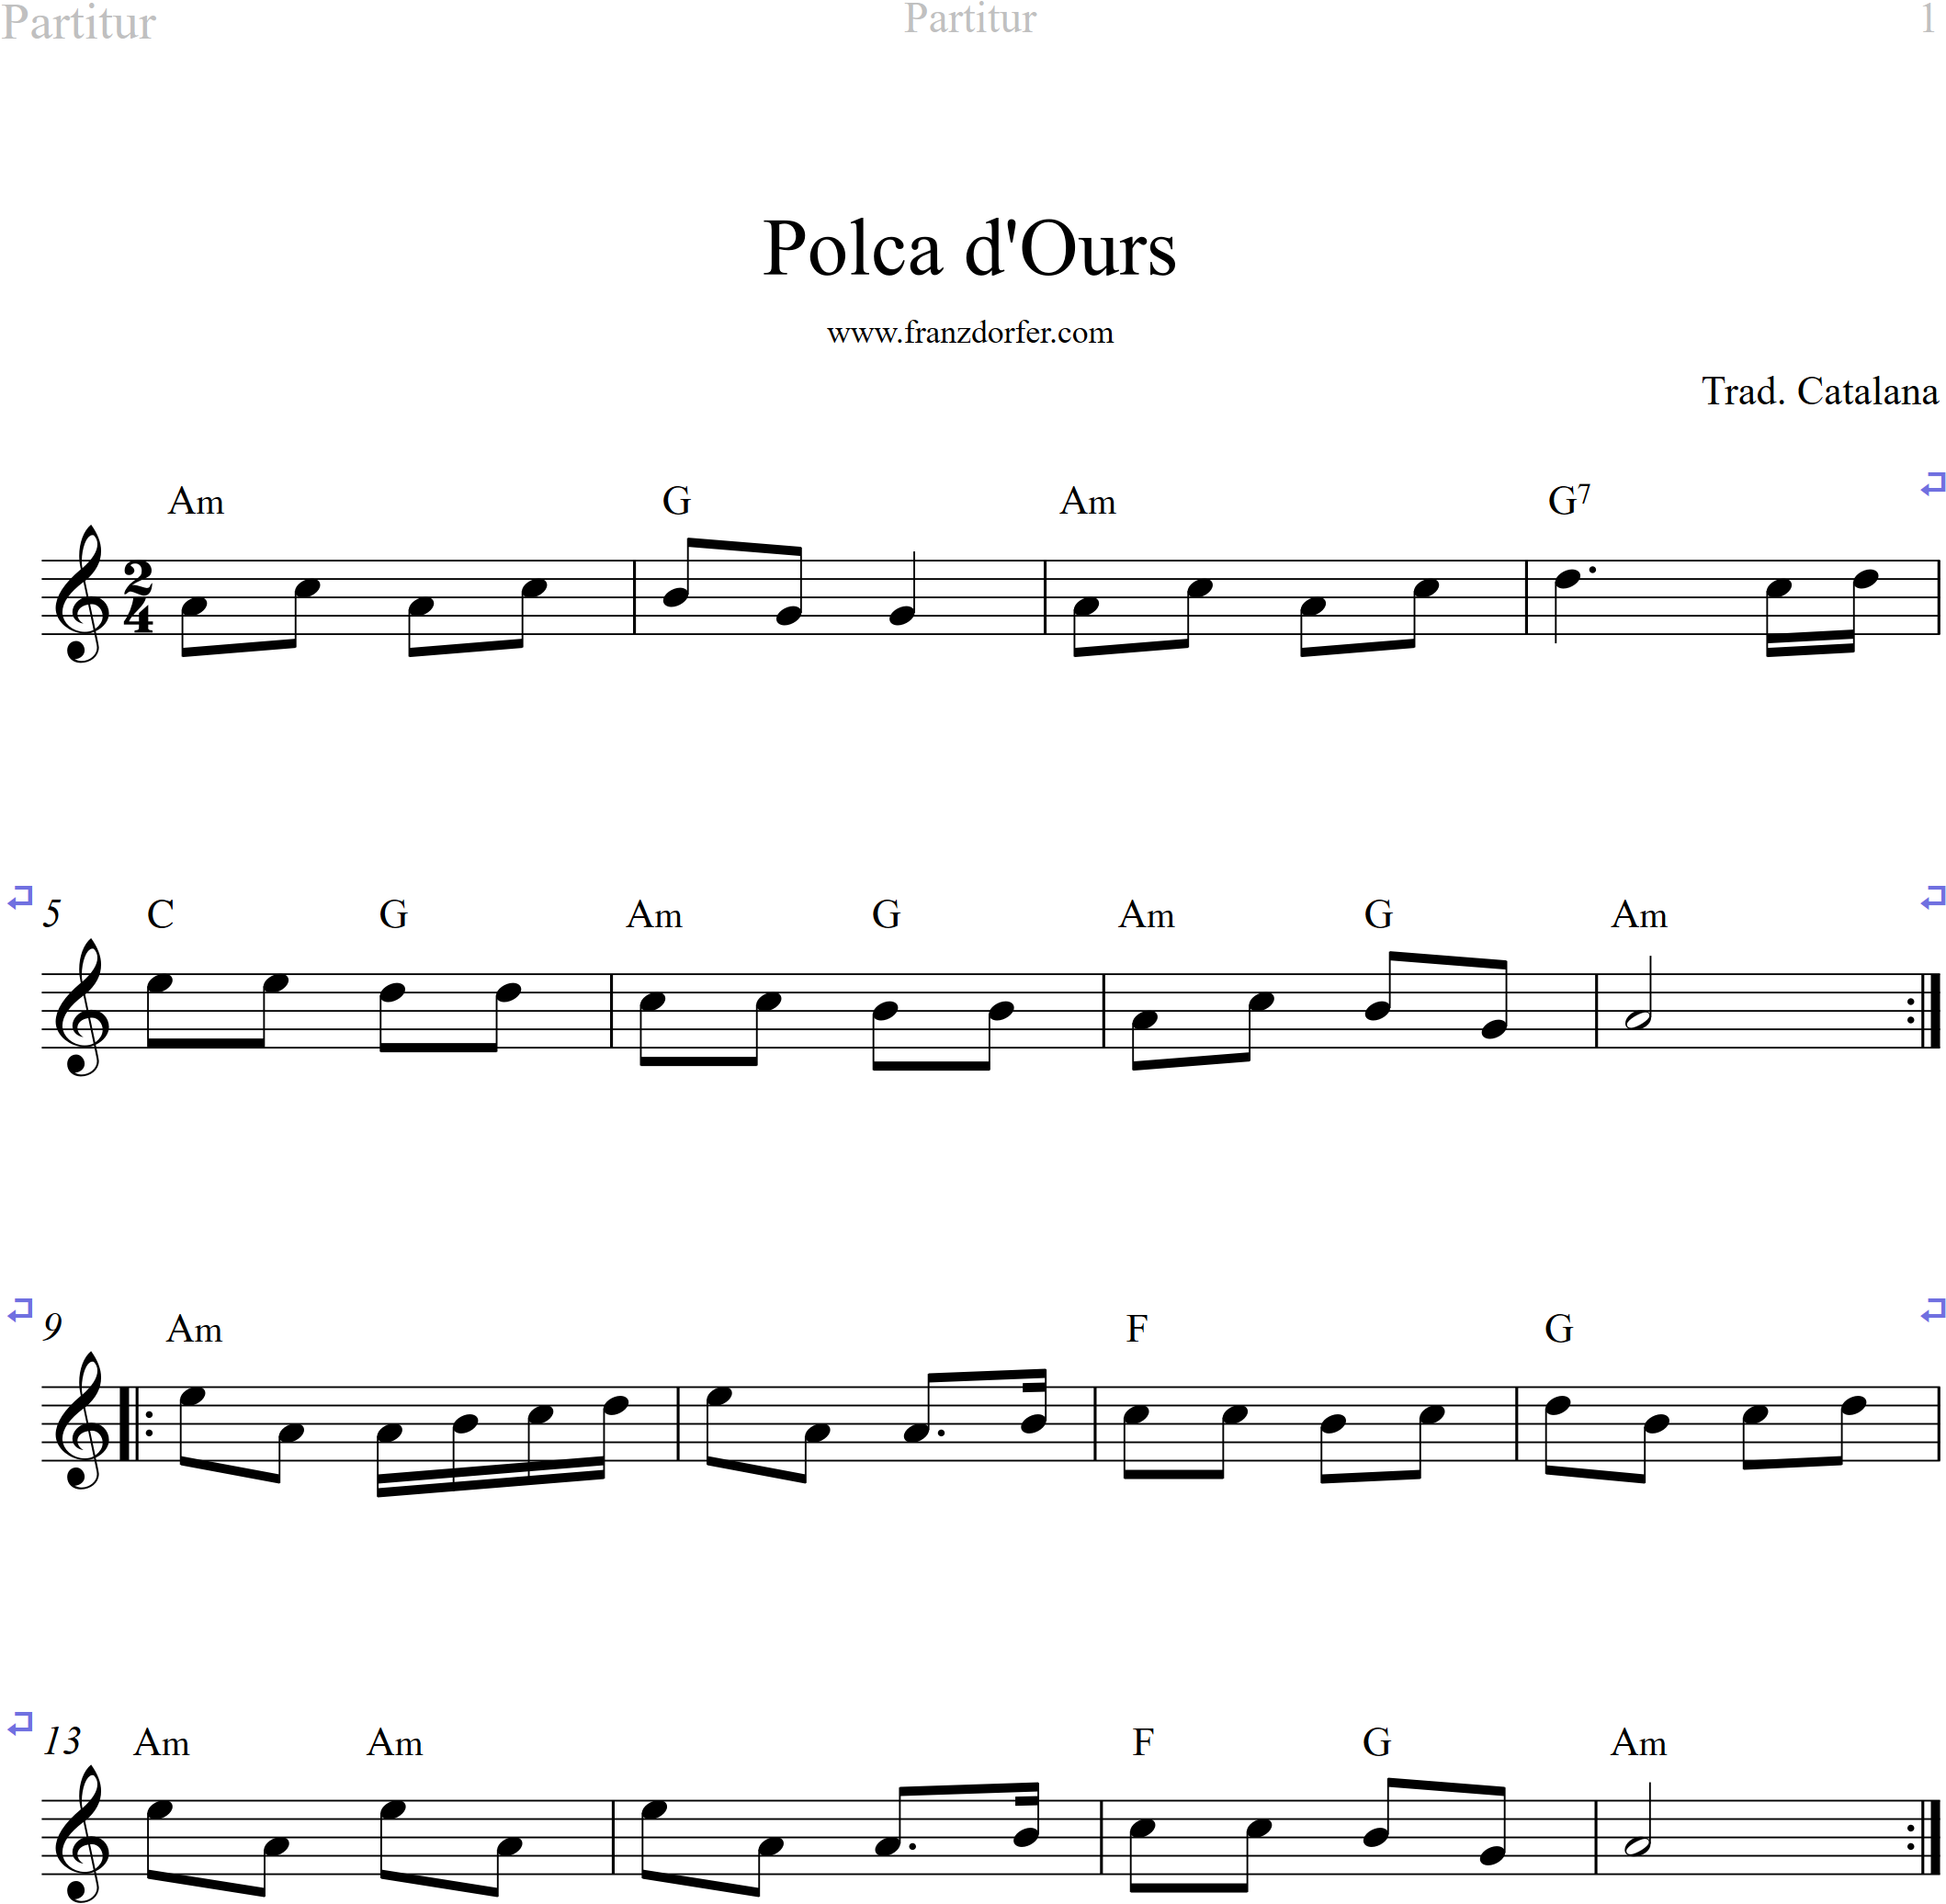 leadsheet, a-minor, Polca d'Ours